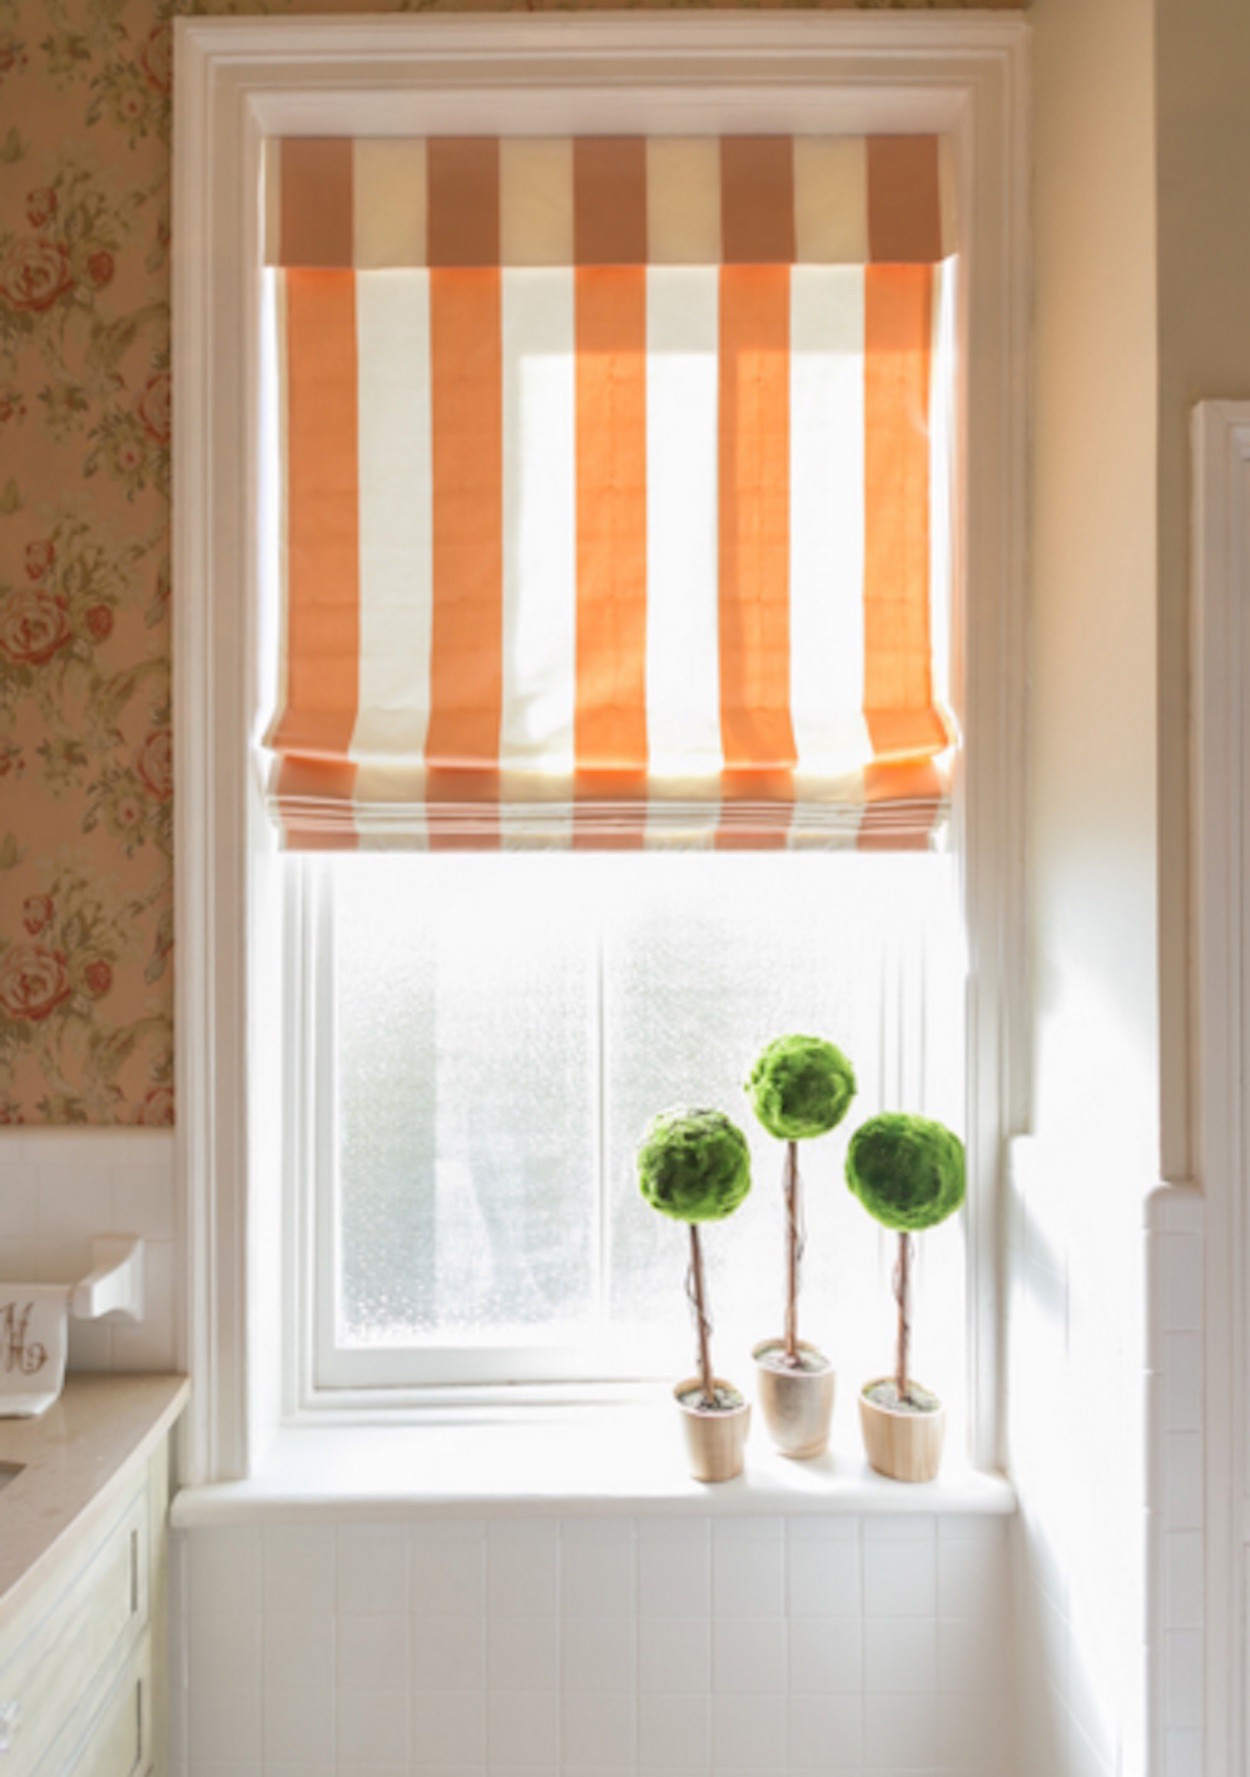 Small Bathroom Window Ideas
 7 Different Bathroom Window Treatments You Might Not Have